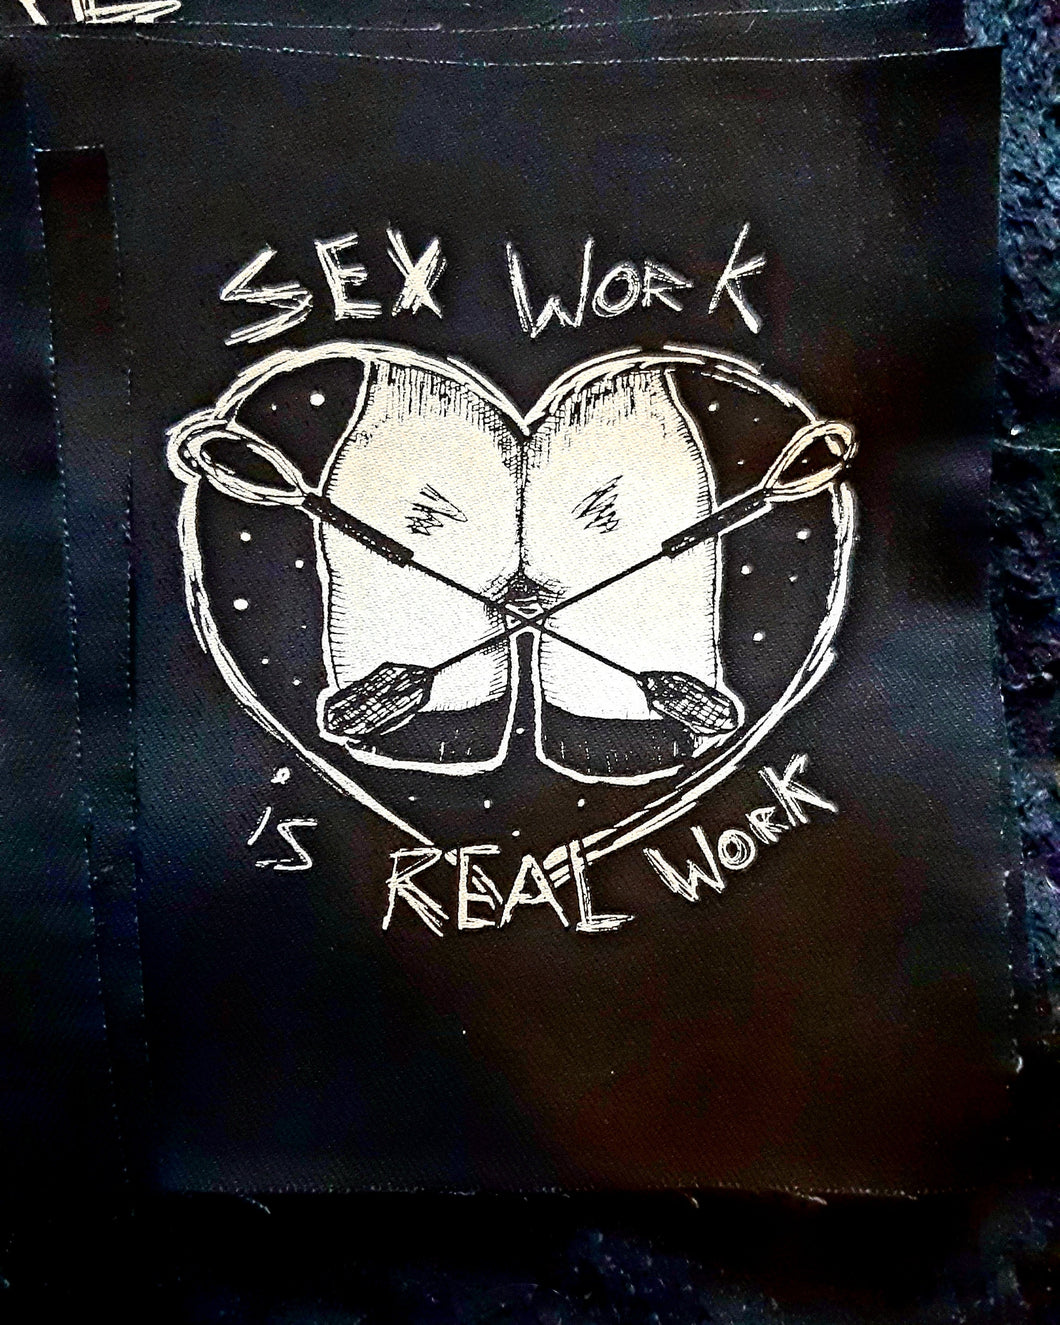 Sex work is real work patch  - Screen printing on black fabric